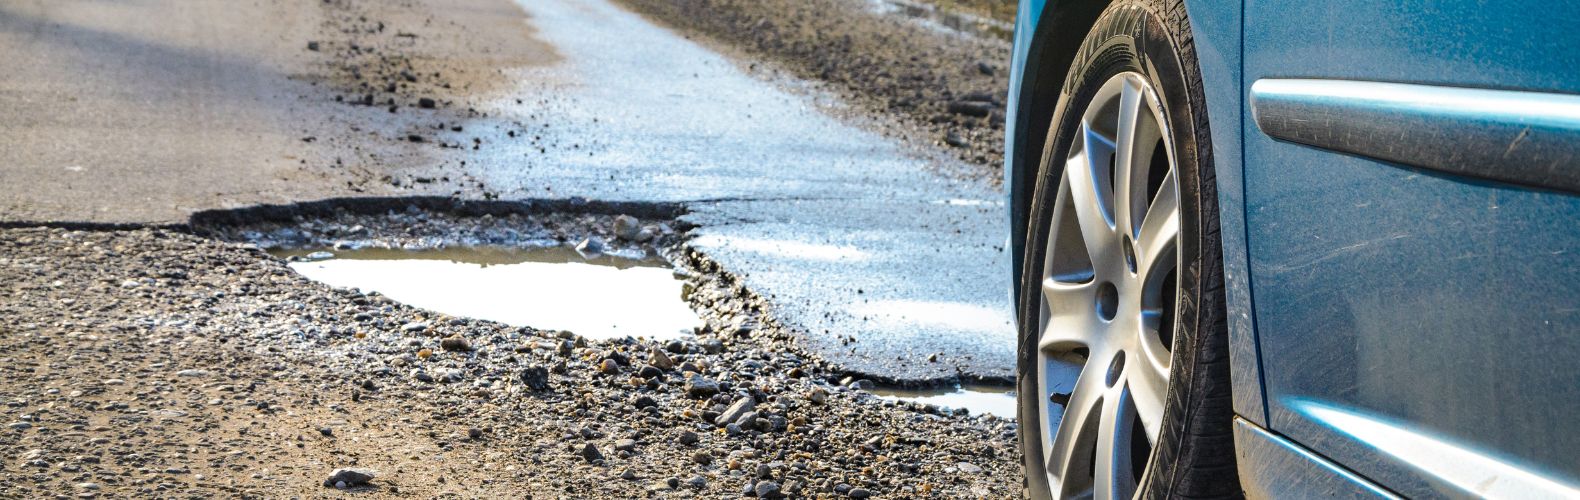 If Your Vehicle is Damaged by a Pothole, Will Auto Insurance Cover It?